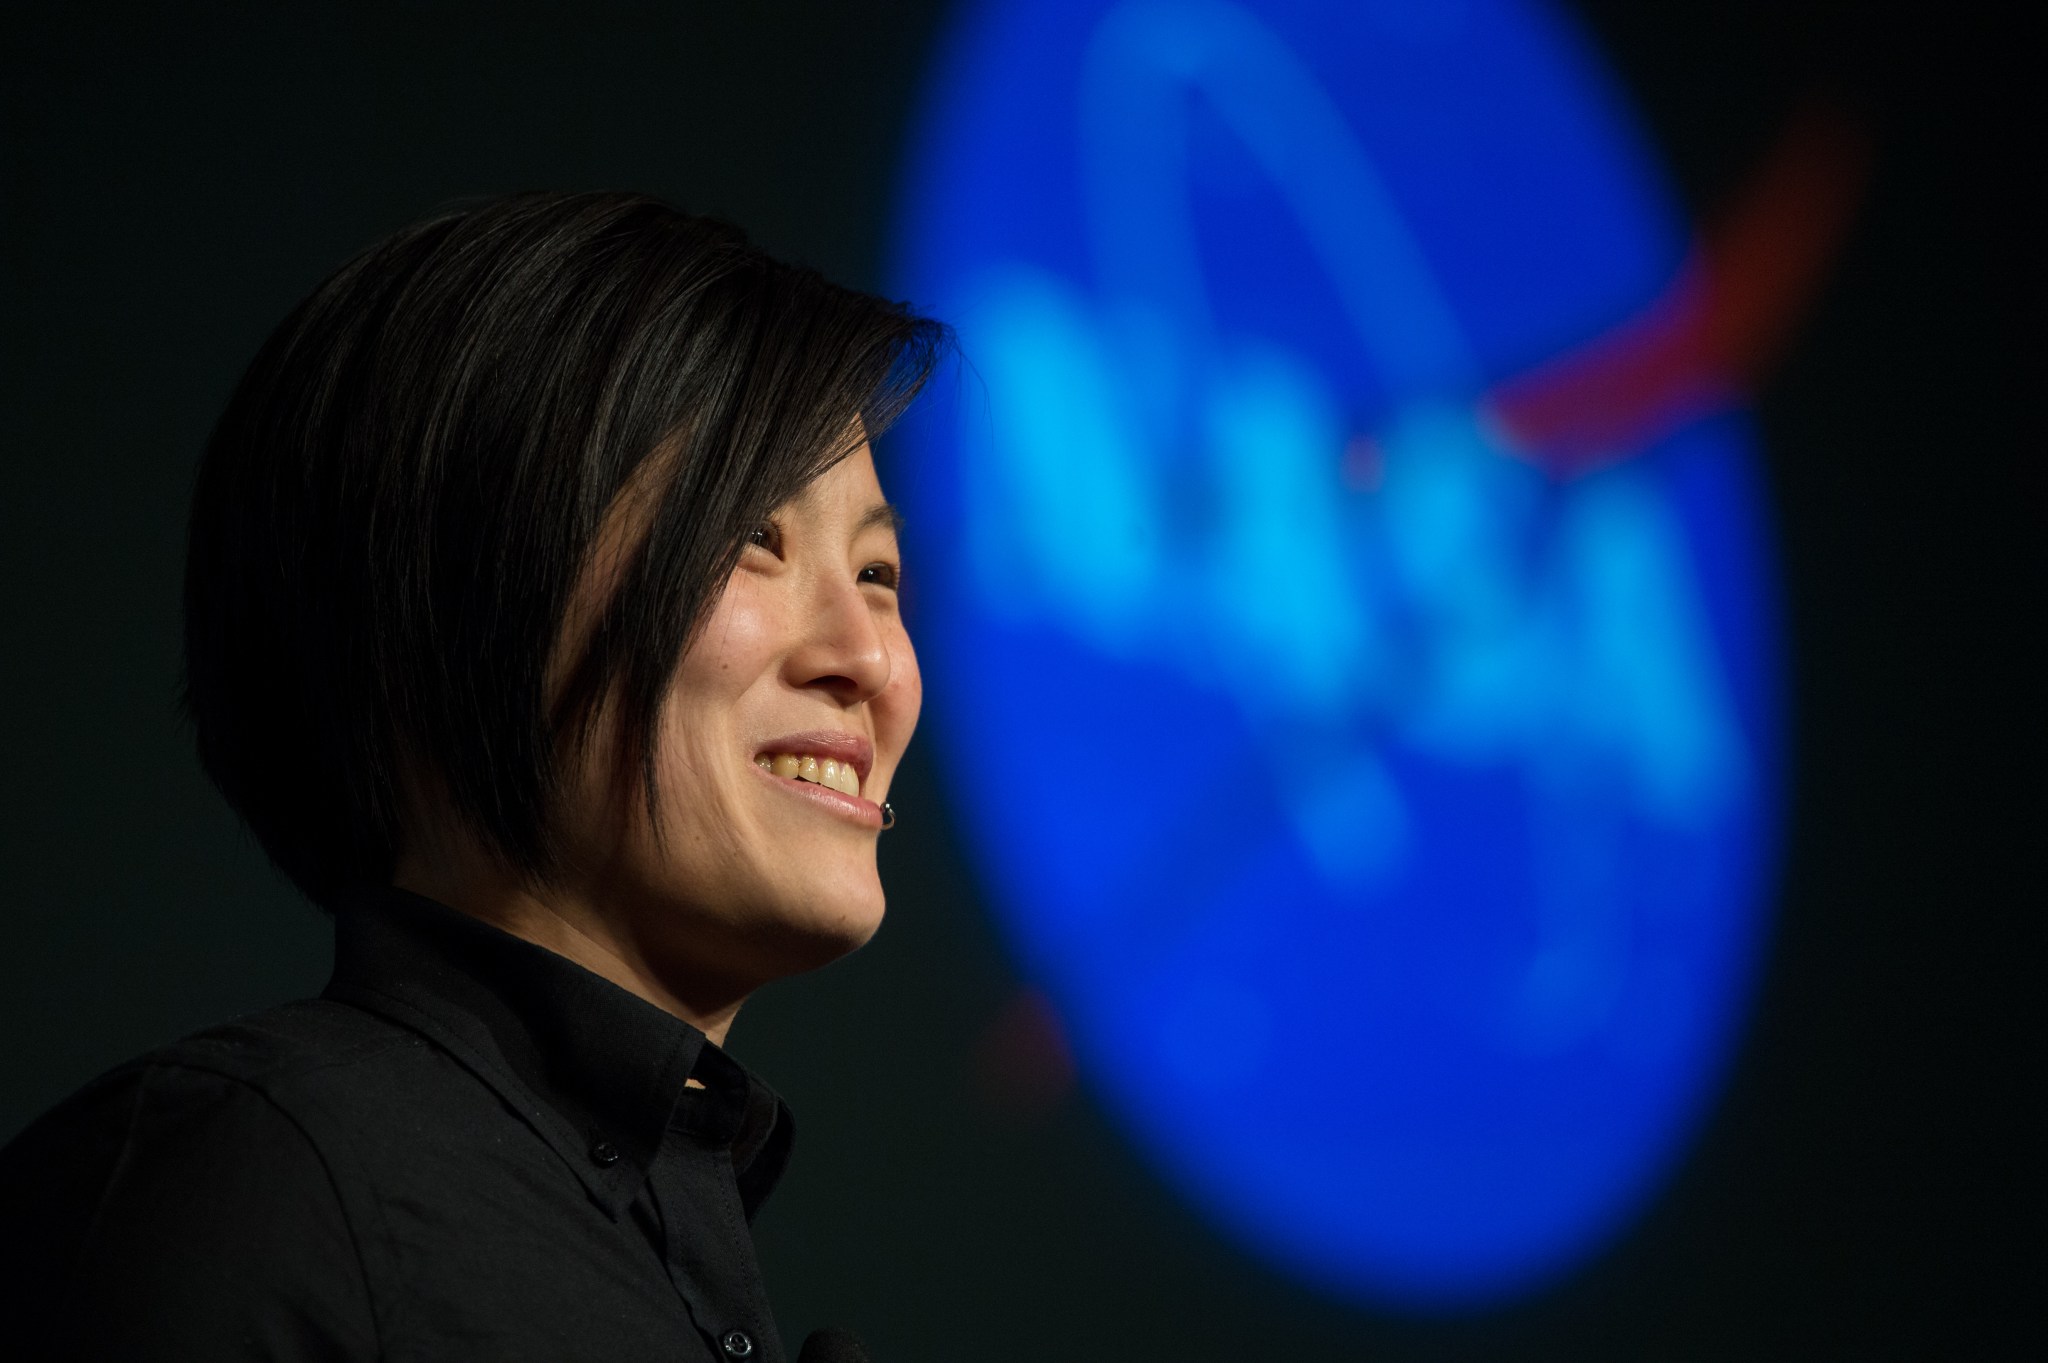 Tina Lai stands in front of a lighted NASA insignia speaking to an unseen group of people